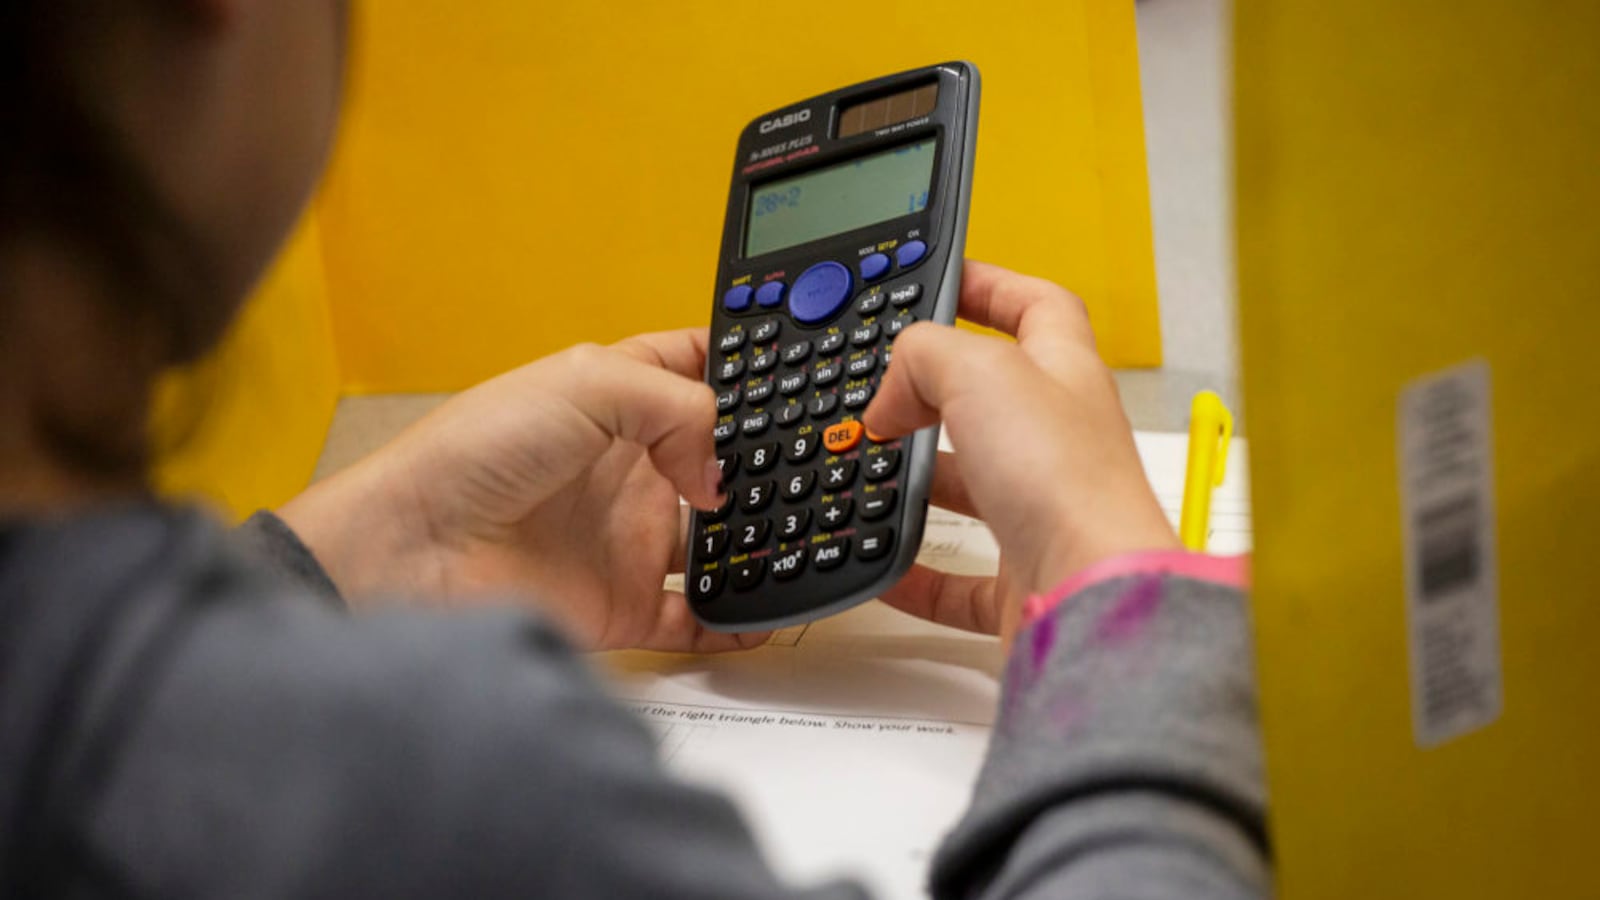 A Noel Community Arts School student works on a calculator during a tutoring period in May 2019.